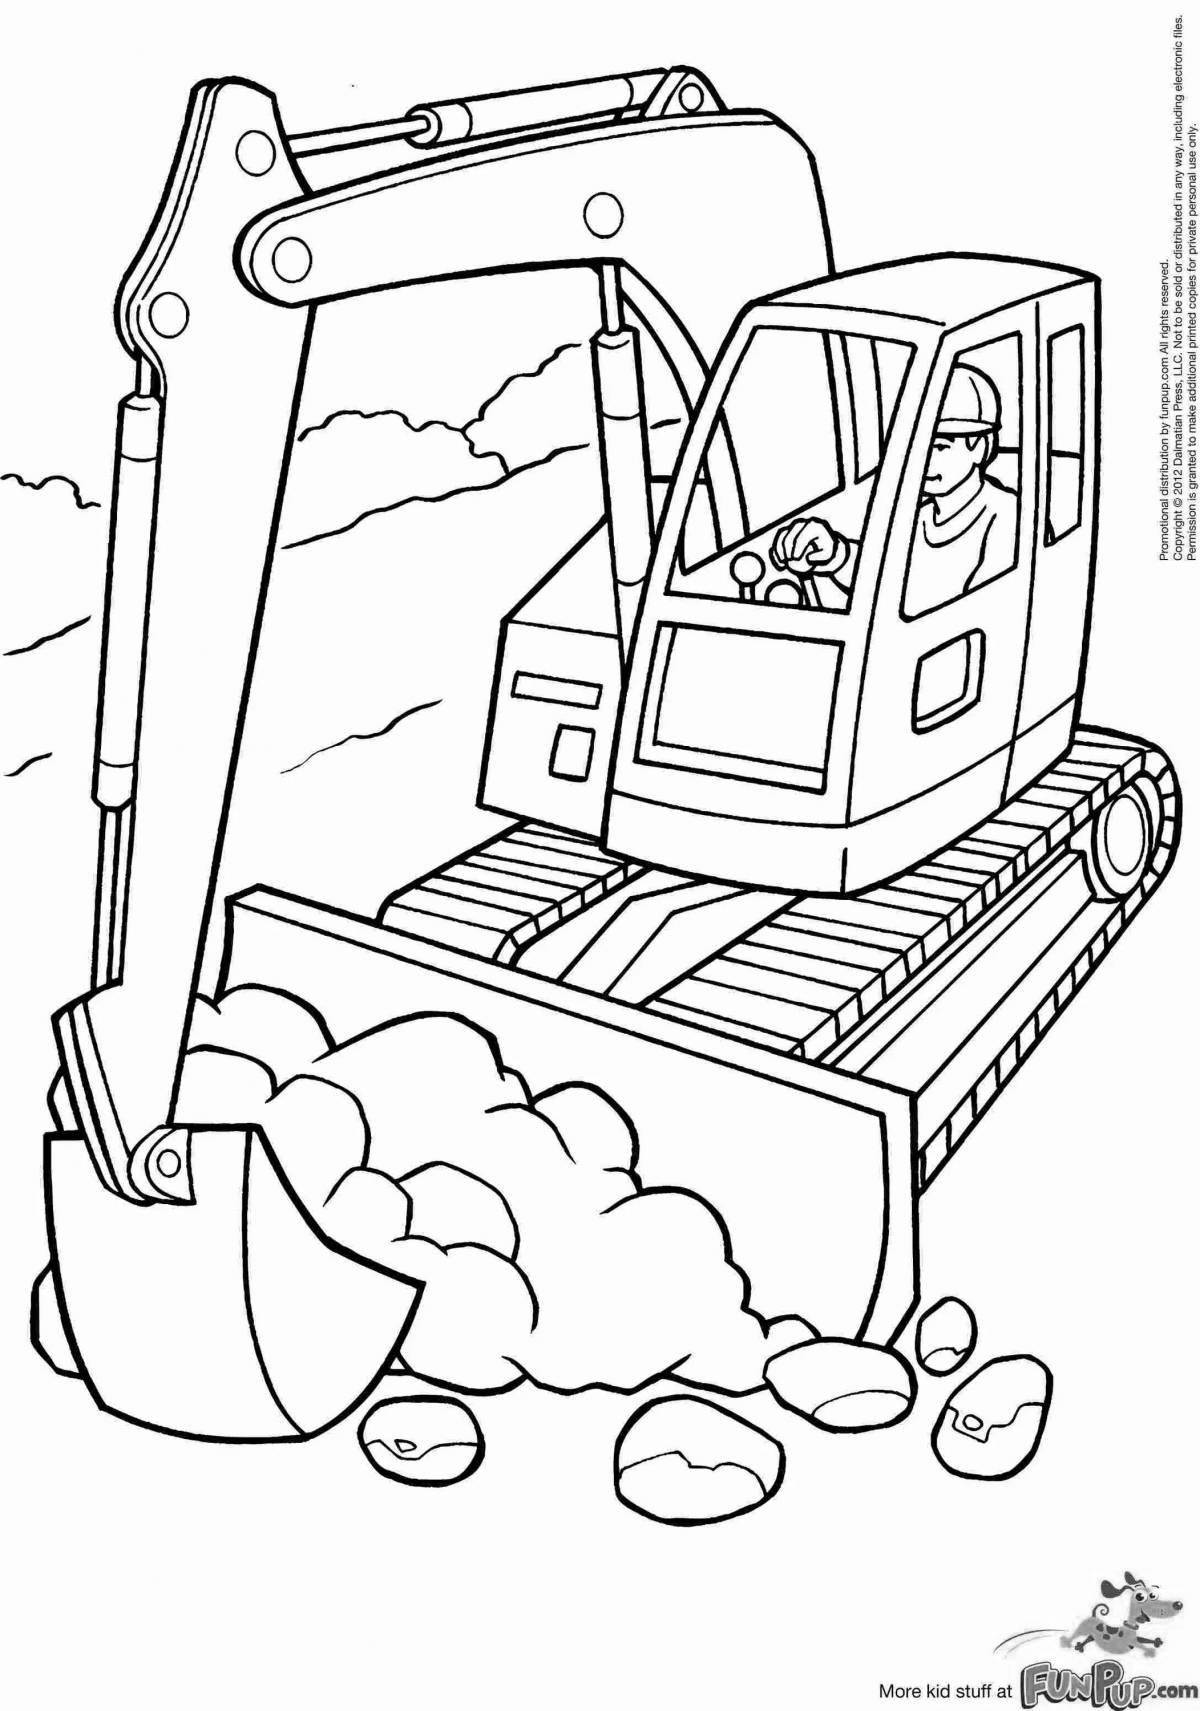 Impressive construction vehicles coloring pages for boys